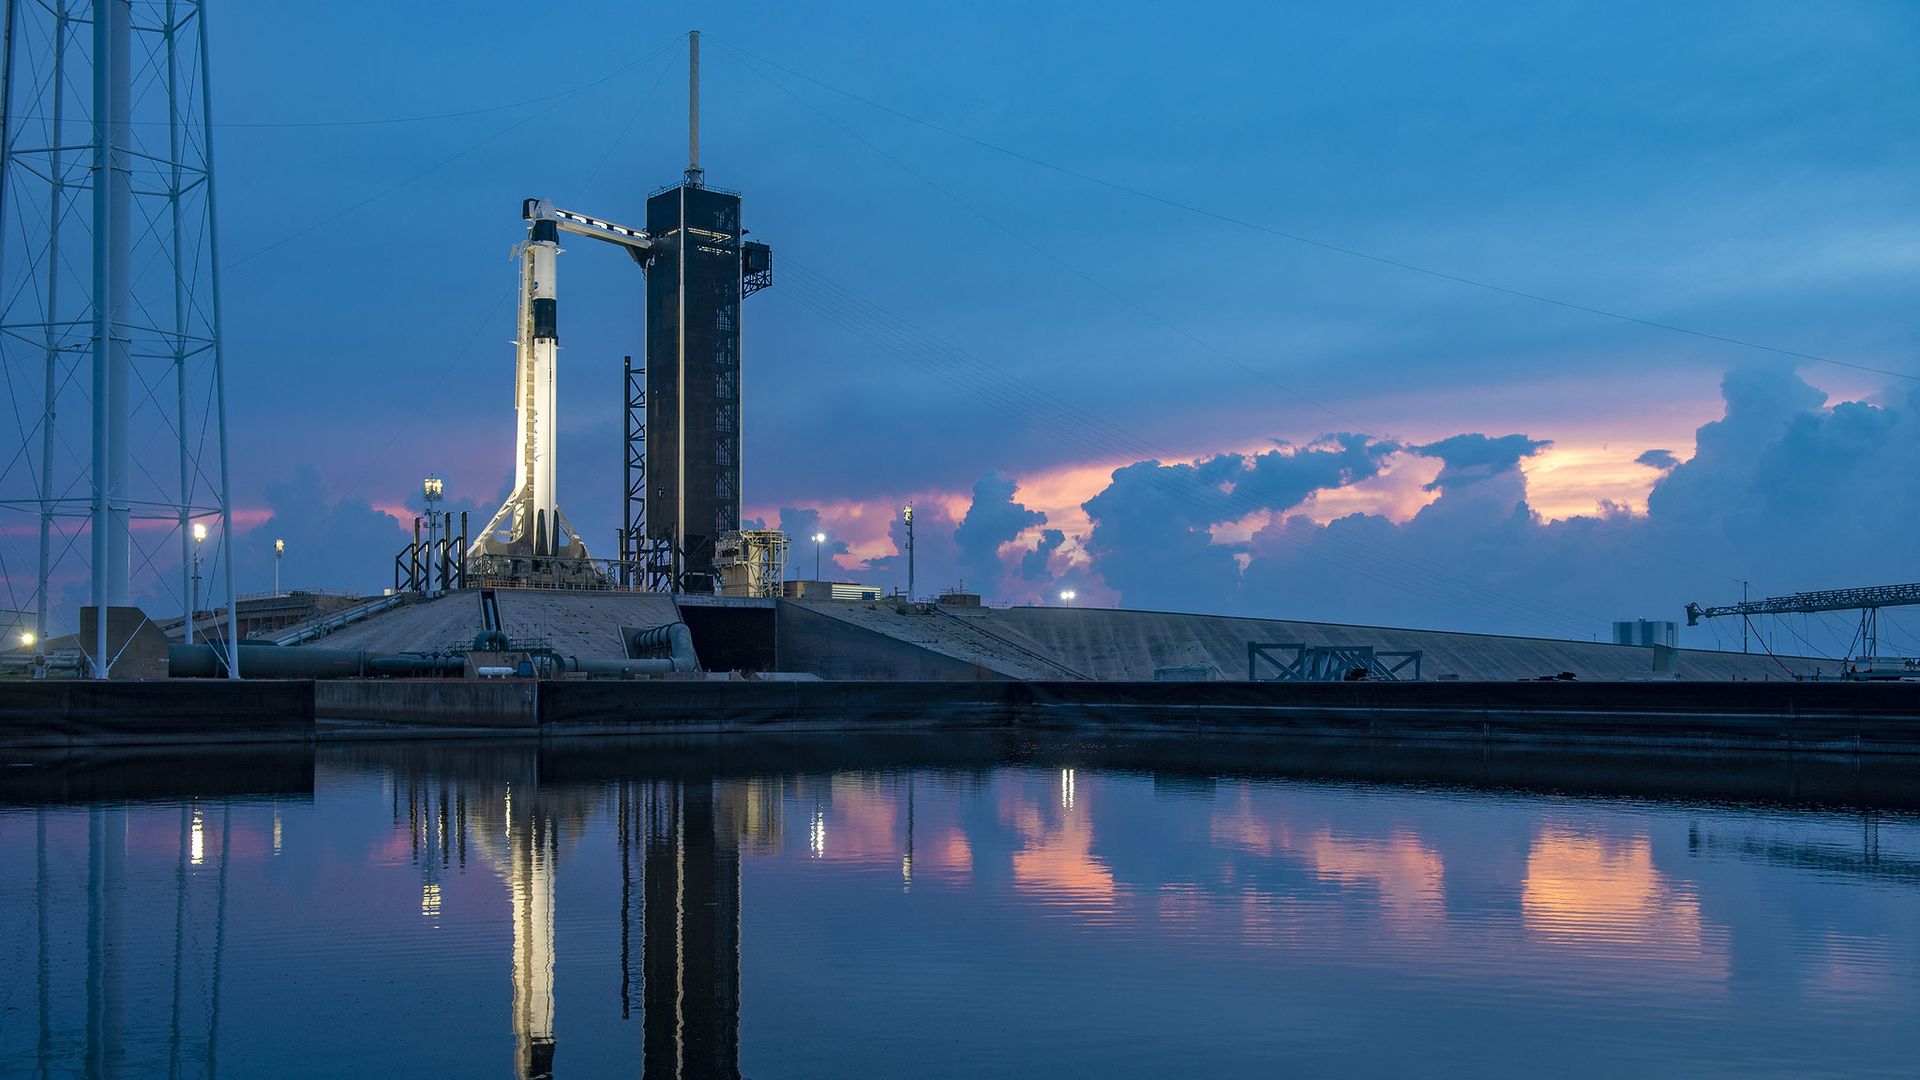 Cape Canaveral with a Falcon 9 rocket rising up into a dark sky above water